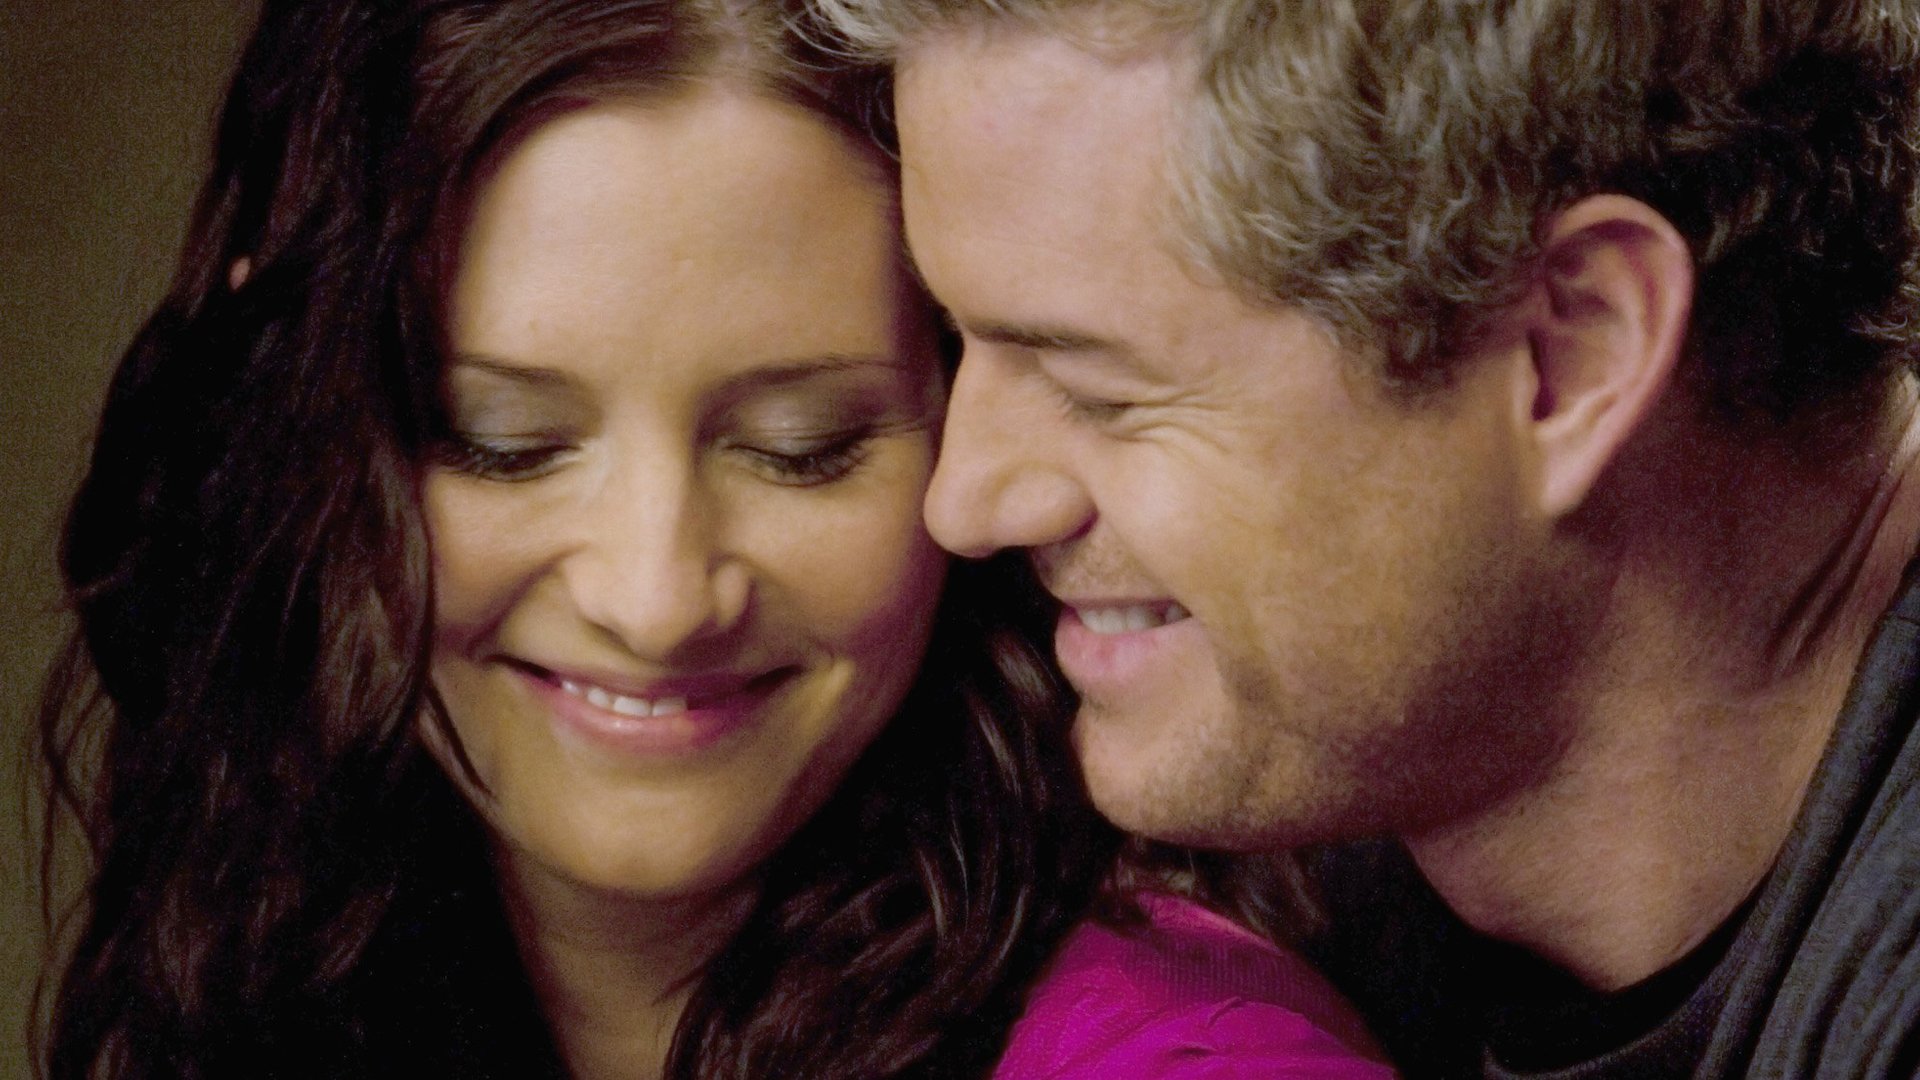 Chyler Leigh as Lexie Grey and Eric Dane as Mark Sloan smiling together in ‘Grey’s Anatomy’